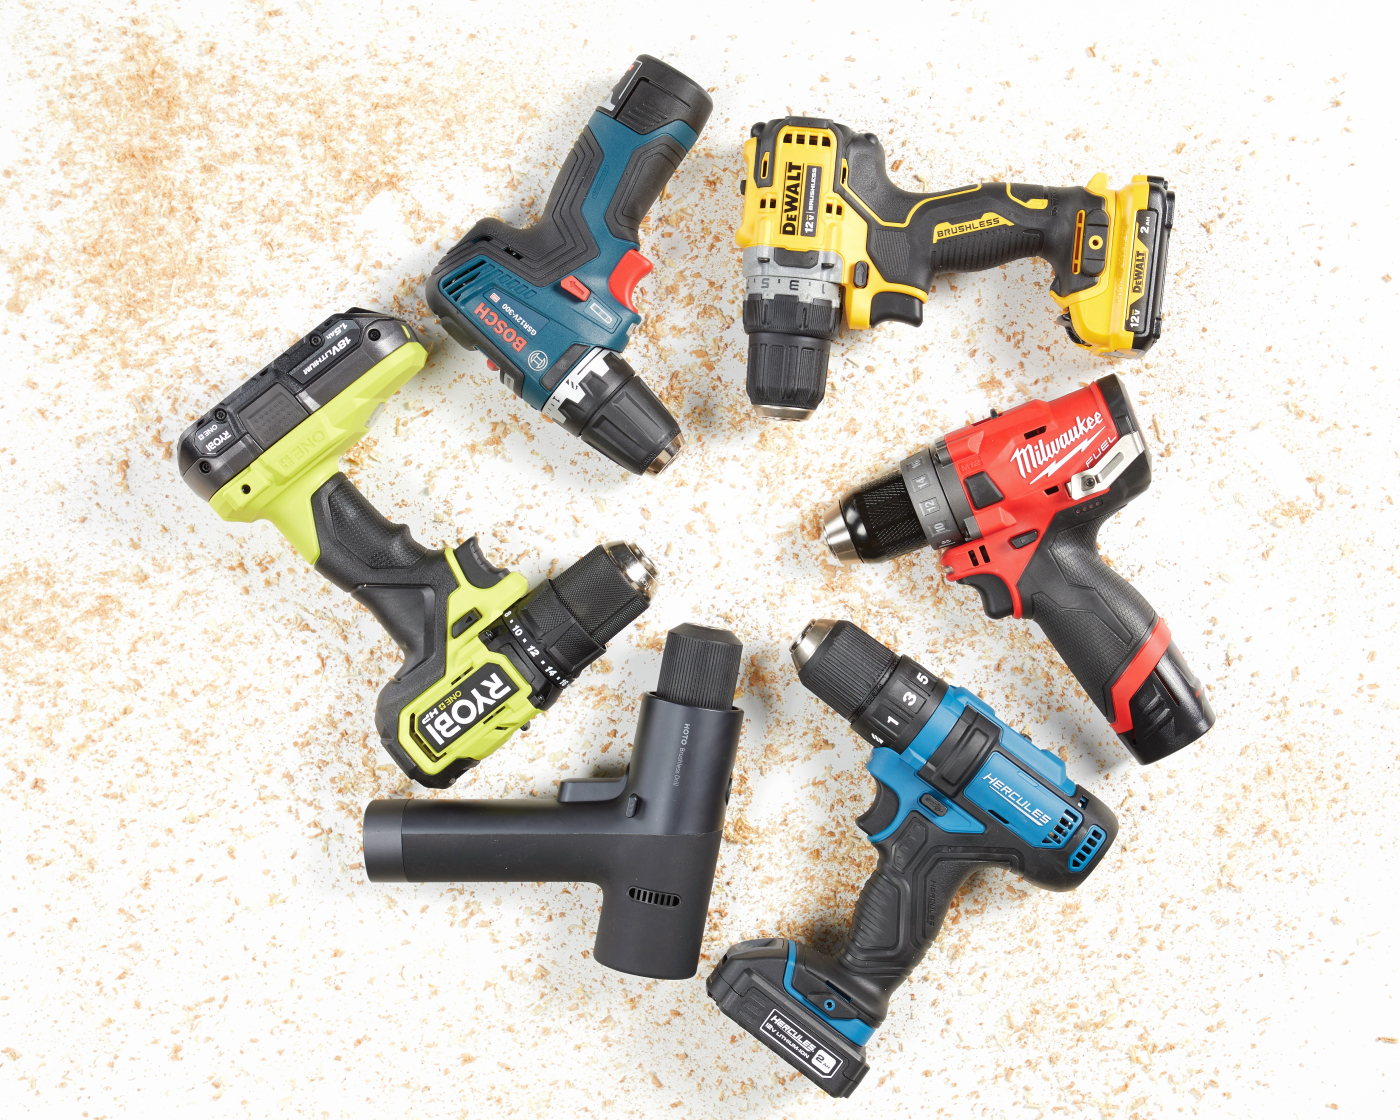 What's the Best 12v Drill?